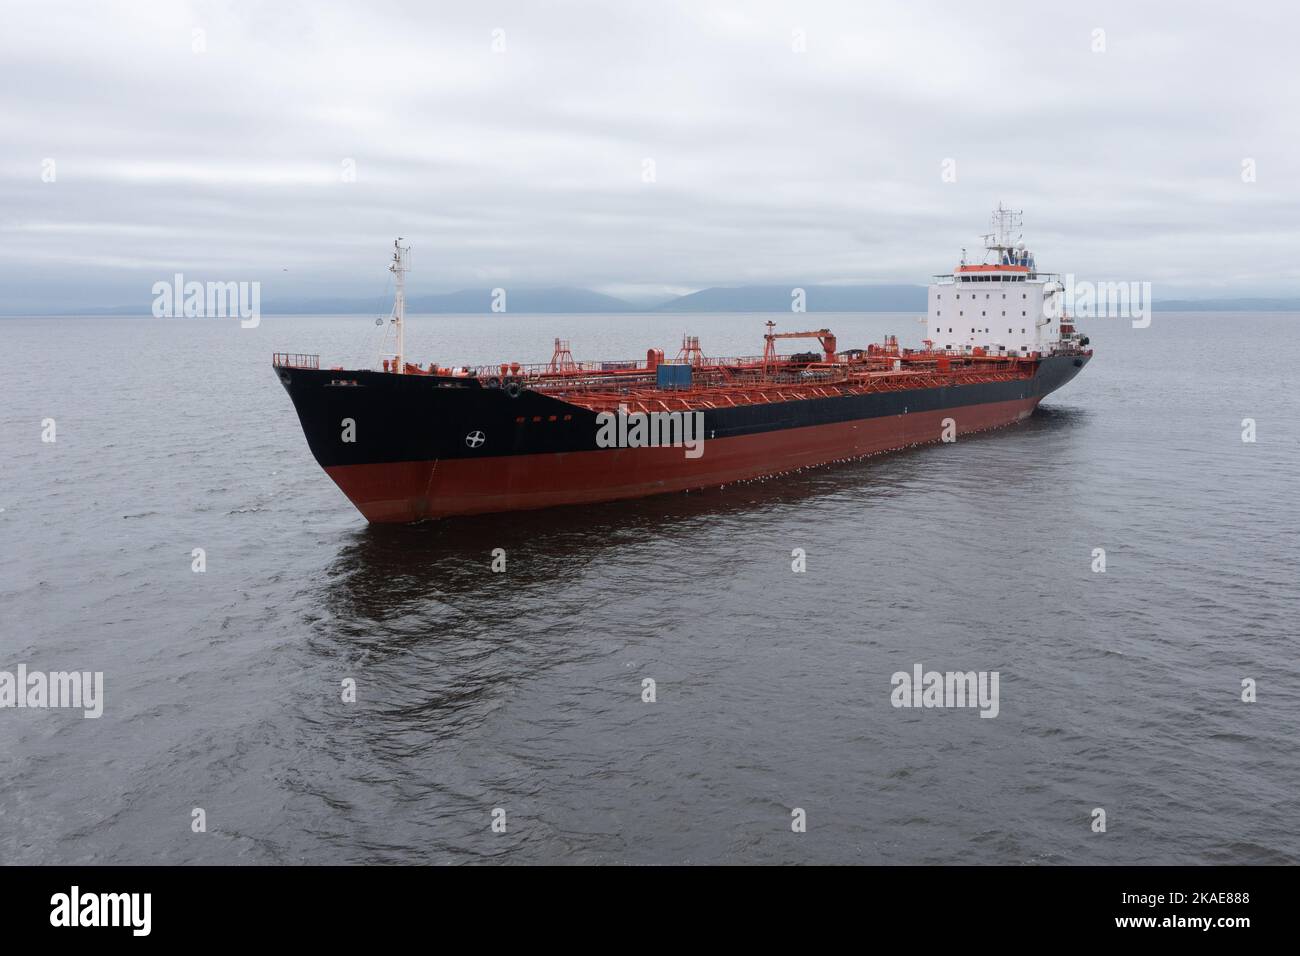 The sea tanker in the middle of a gulf. Stock Photo